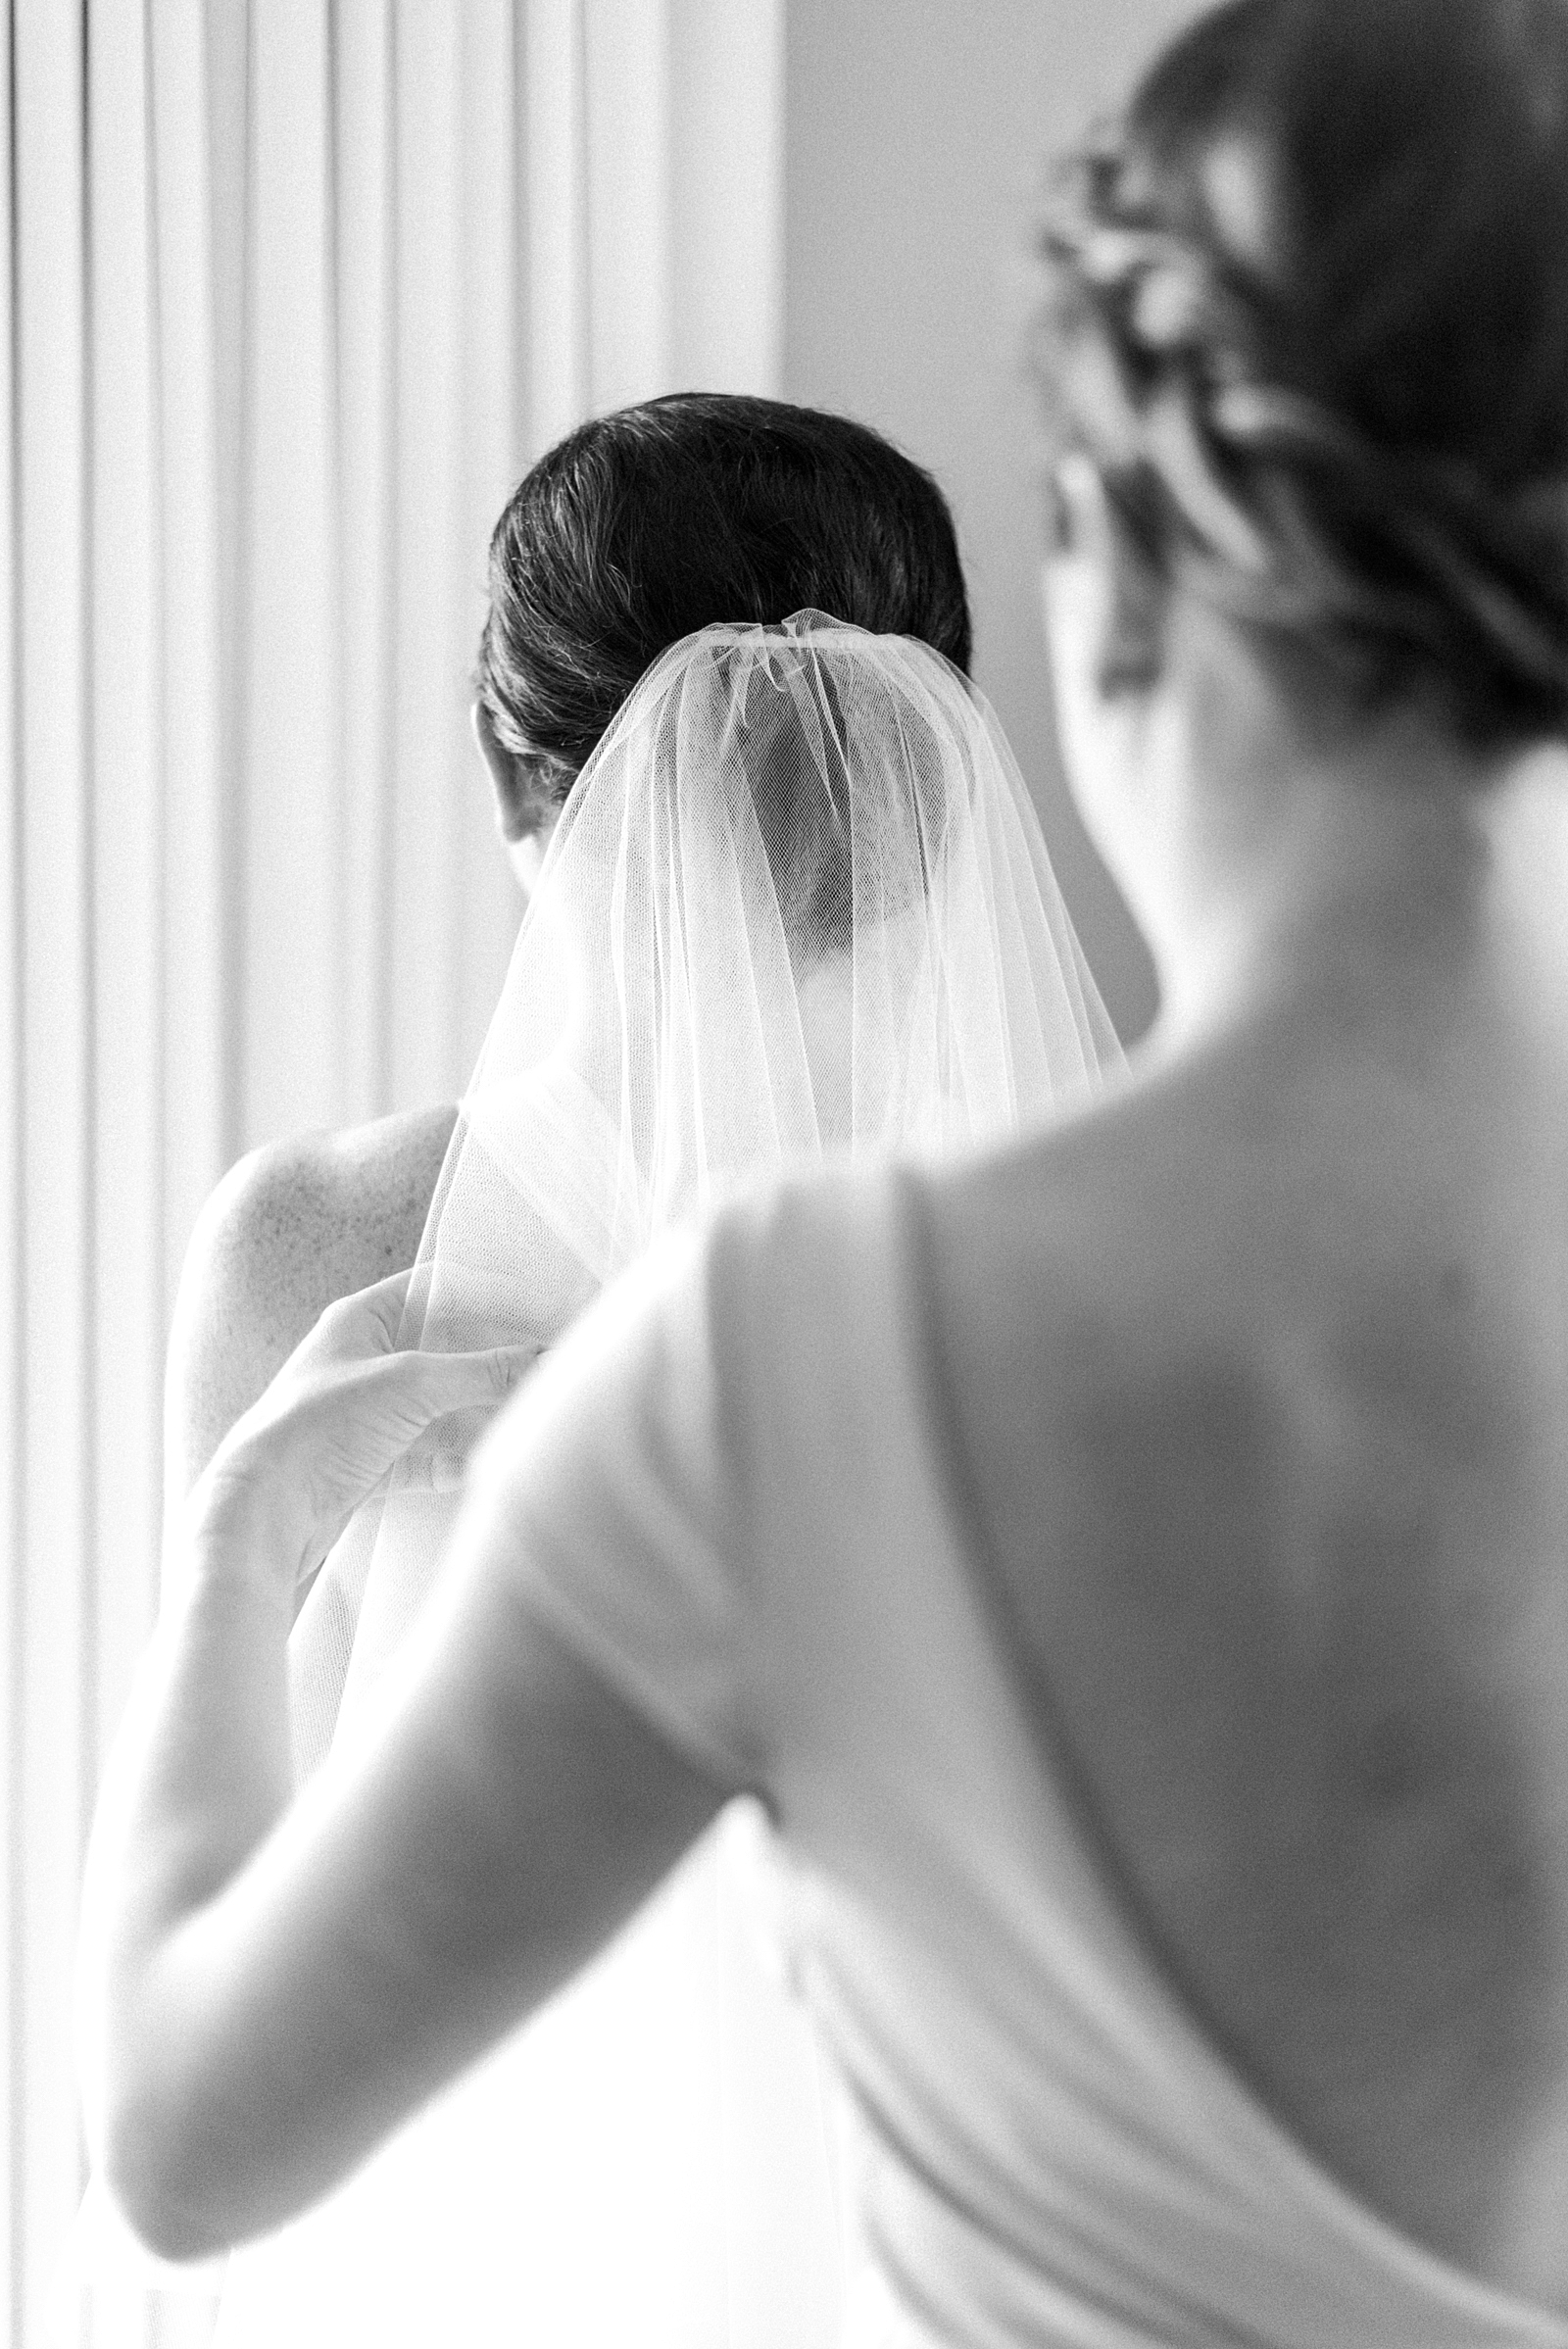 Getting Ready at Beauport Hotel in Glocuester, MA before Micro Wedding by Boston Wedding Photographer Annmarie Swift